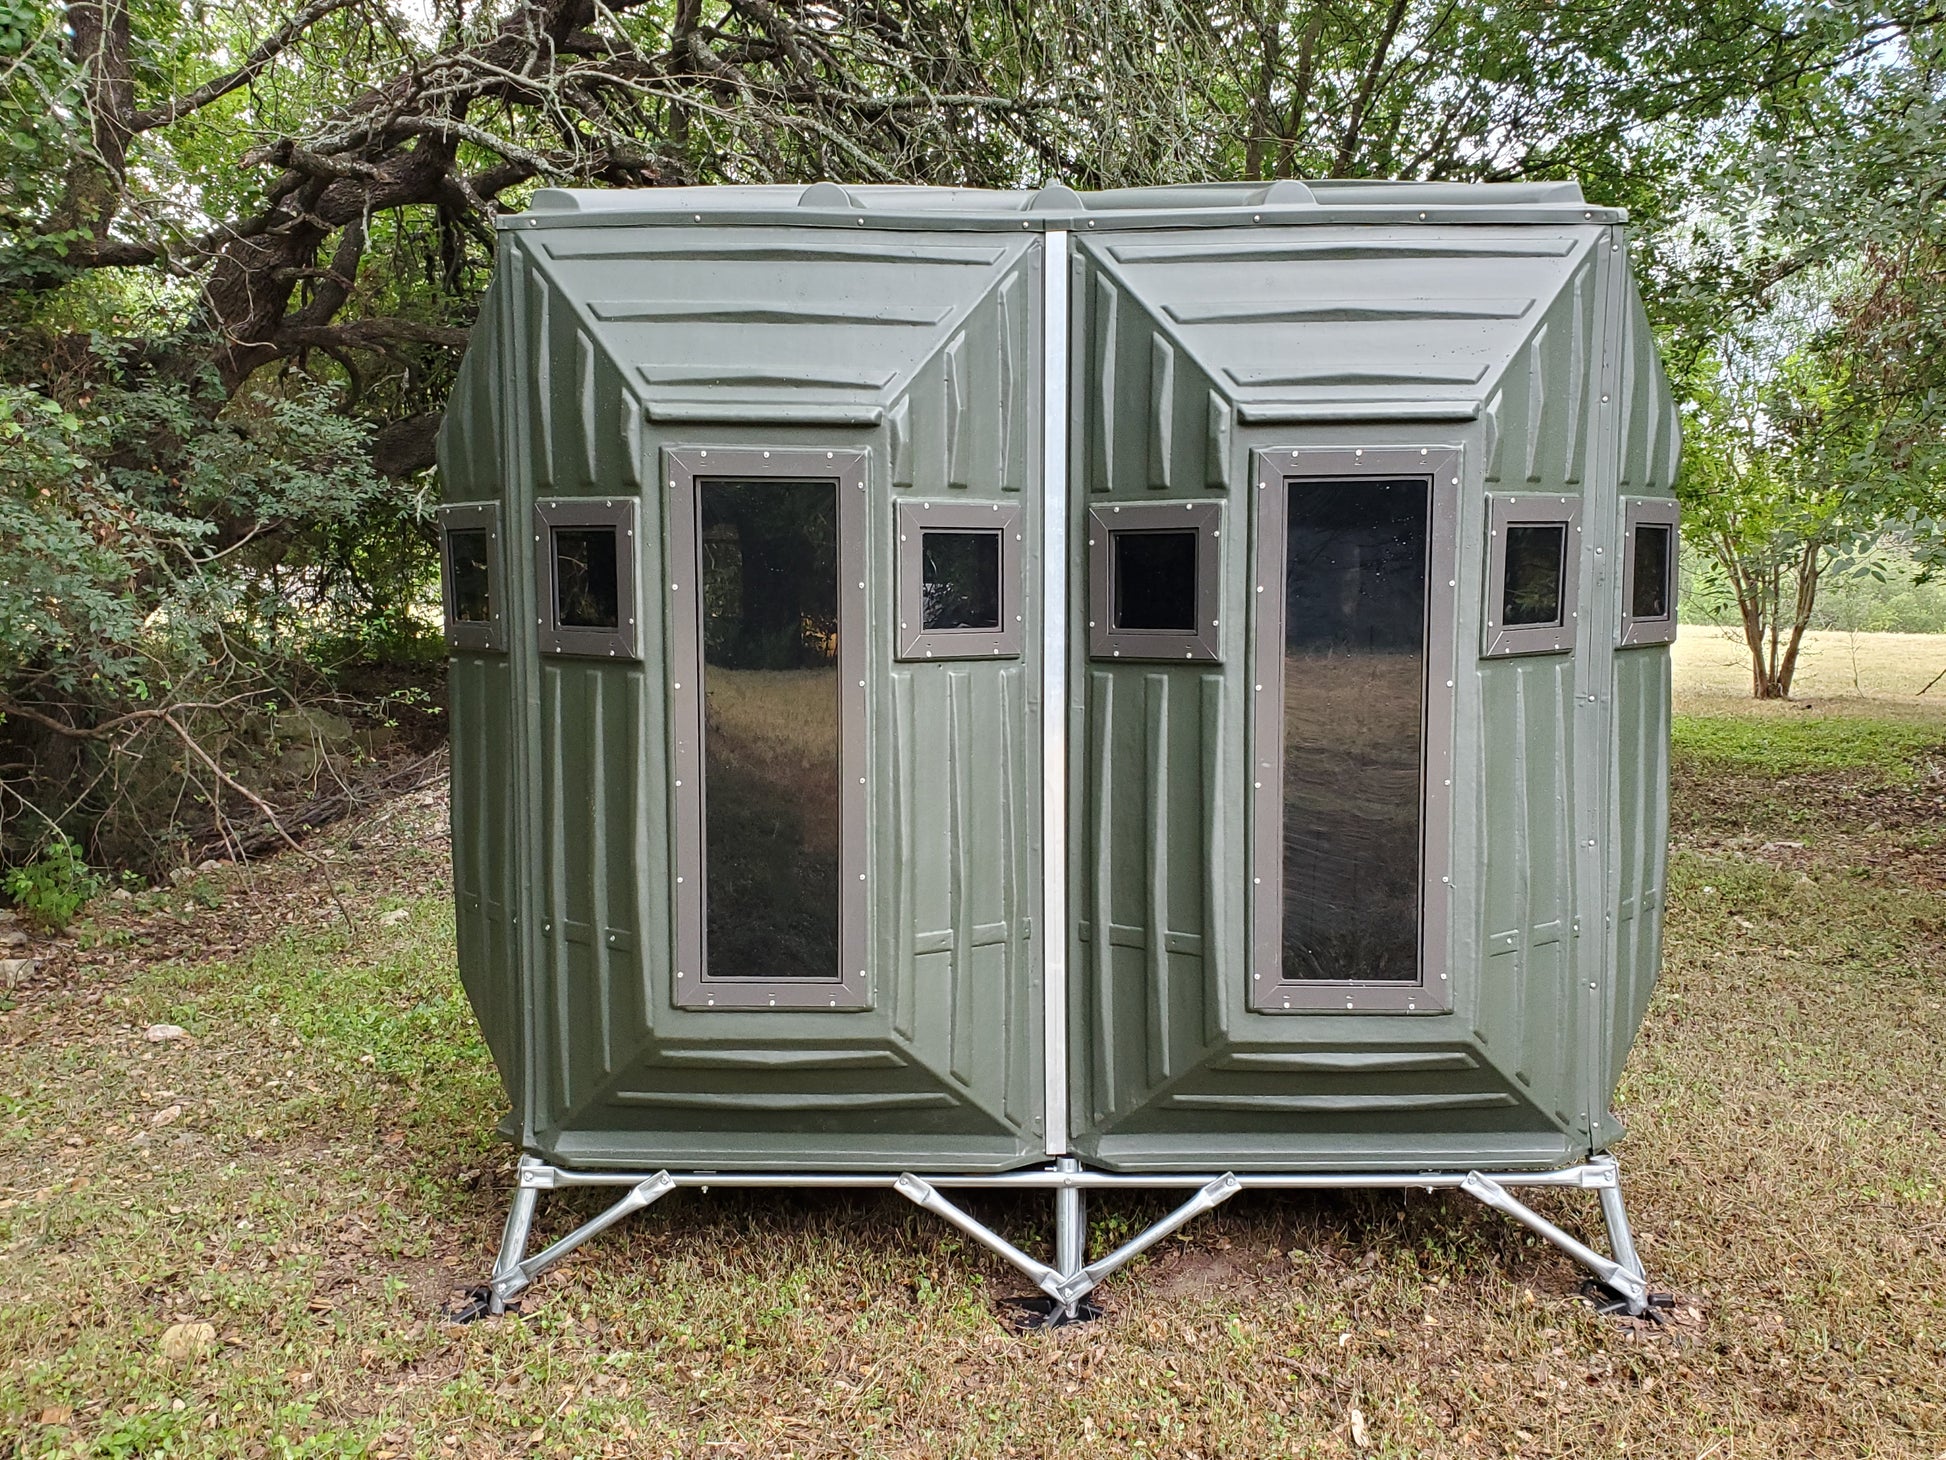 'The Bynd' 4'x8' Bow Hunting Blind - Olive Drab Green with Full Door